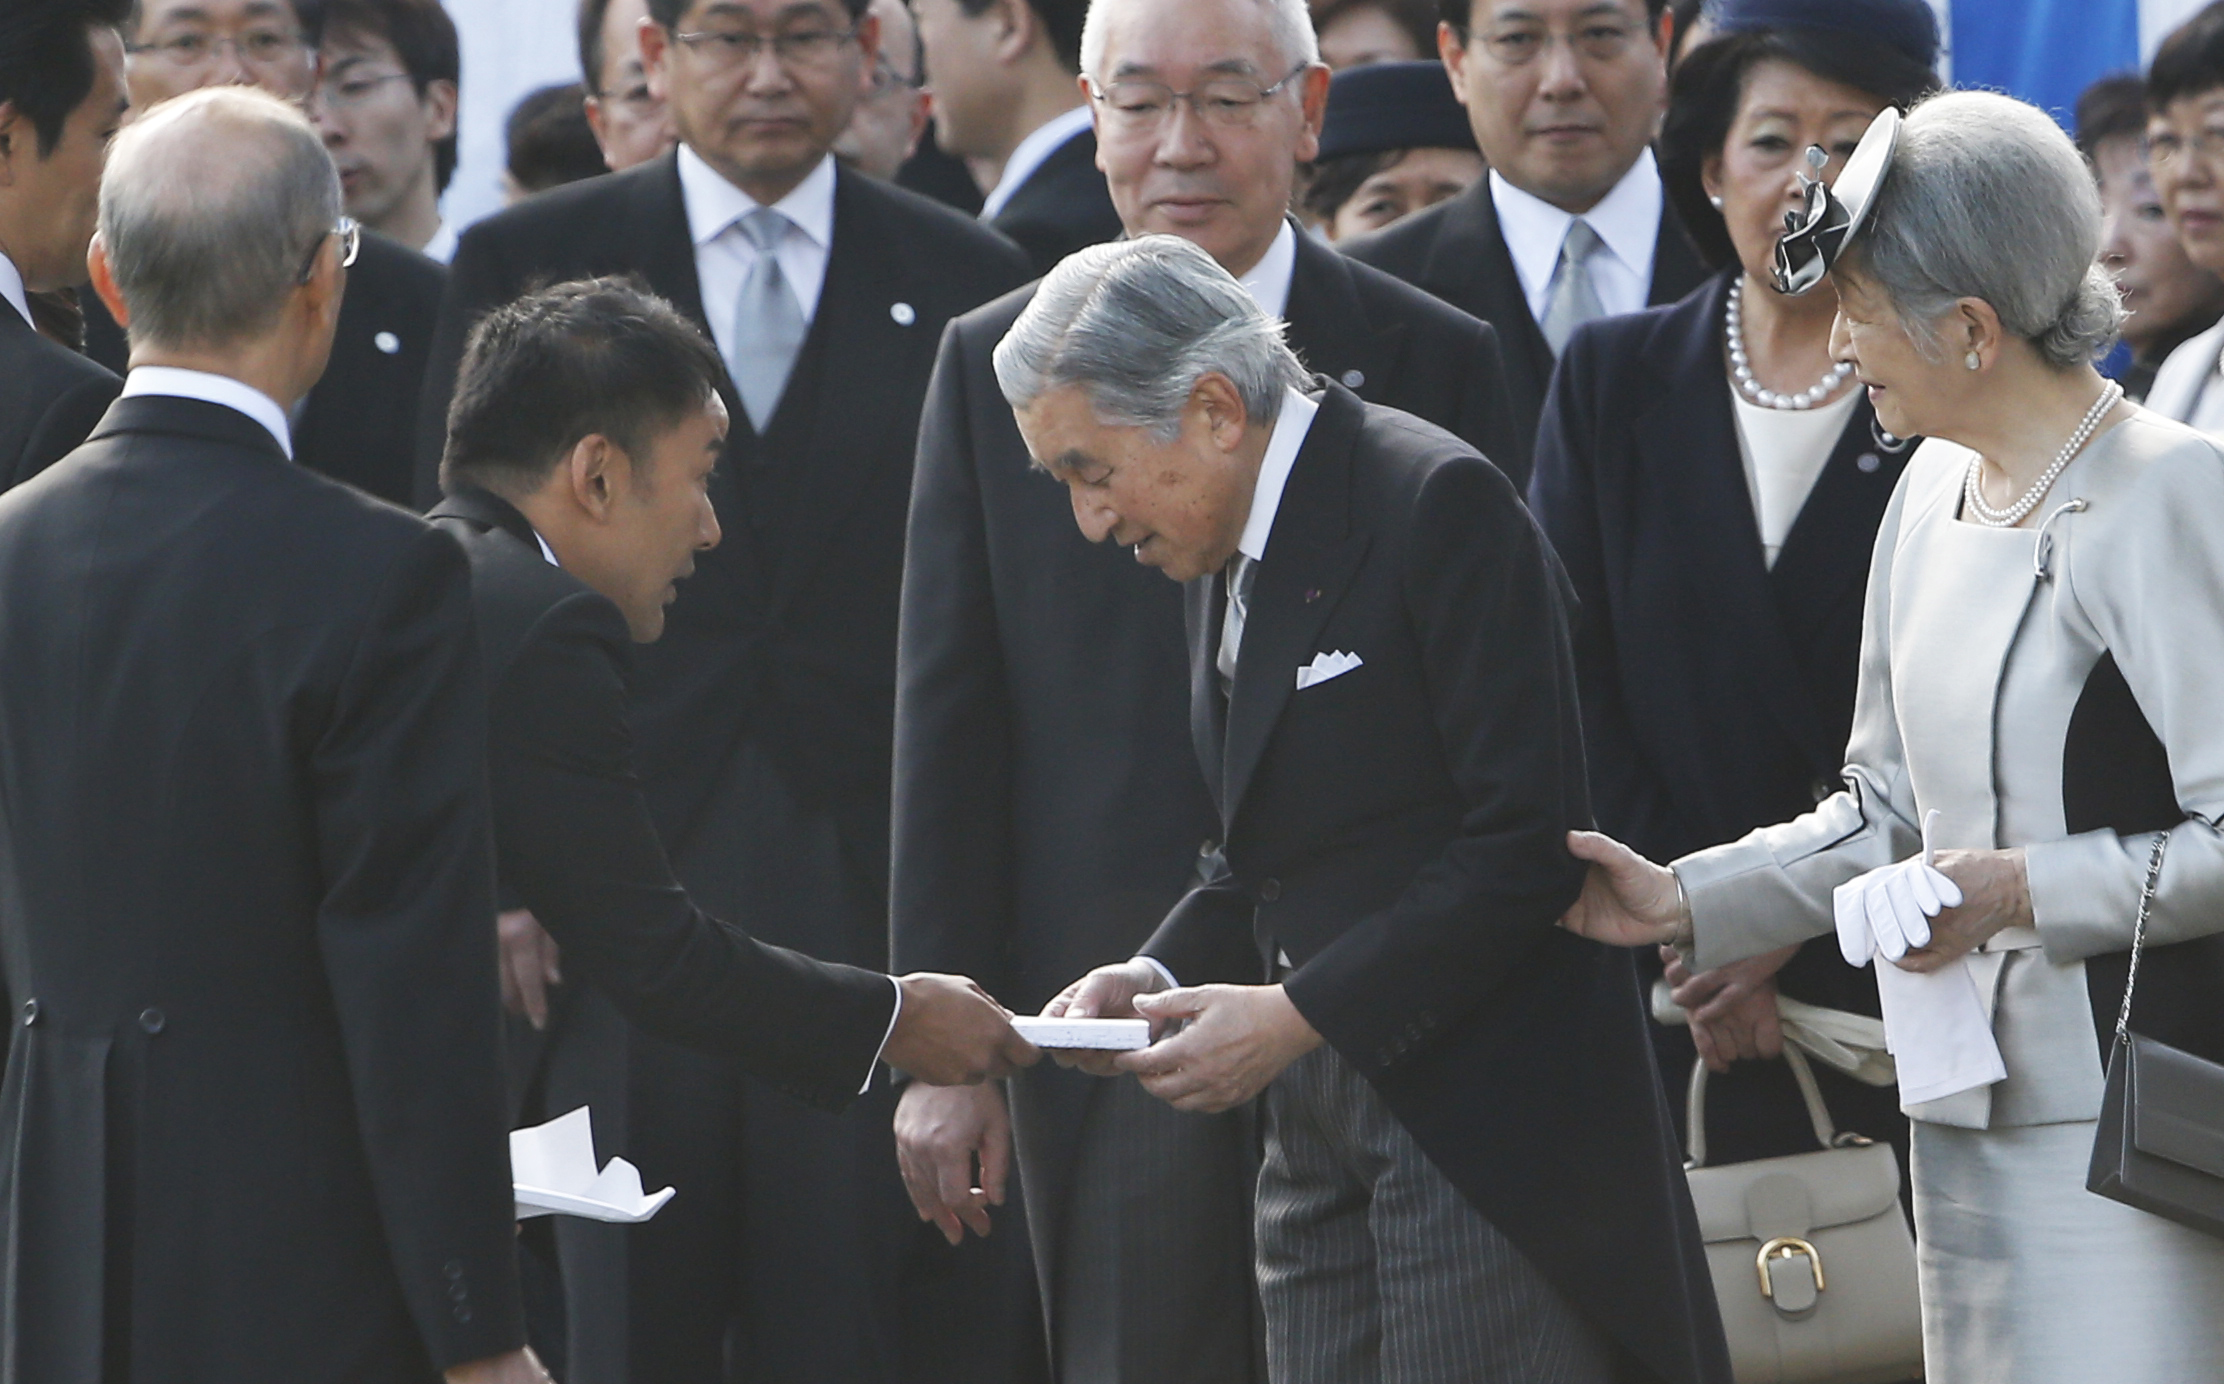 Actor-turned-lawmaker Taro Yamamoto, second left, hands over a letter to Japan's Emperor Akihito, second right. Photo: AP